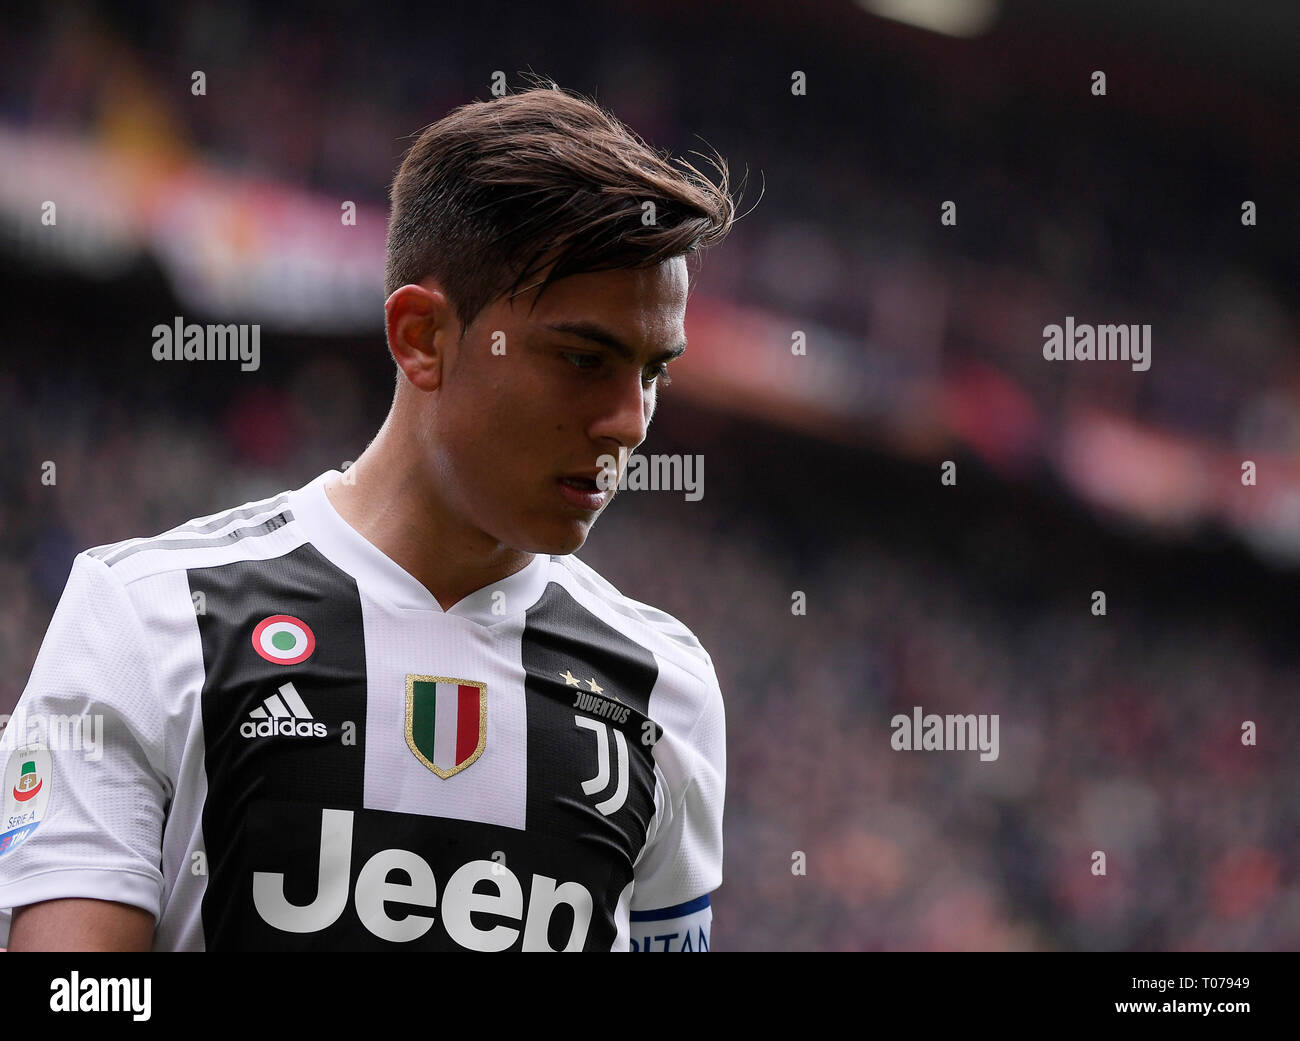 Genoa, Italy. 17th Mar, 2019. Juventus' Paulo Dybala reacts during an  Italian Serie A match between